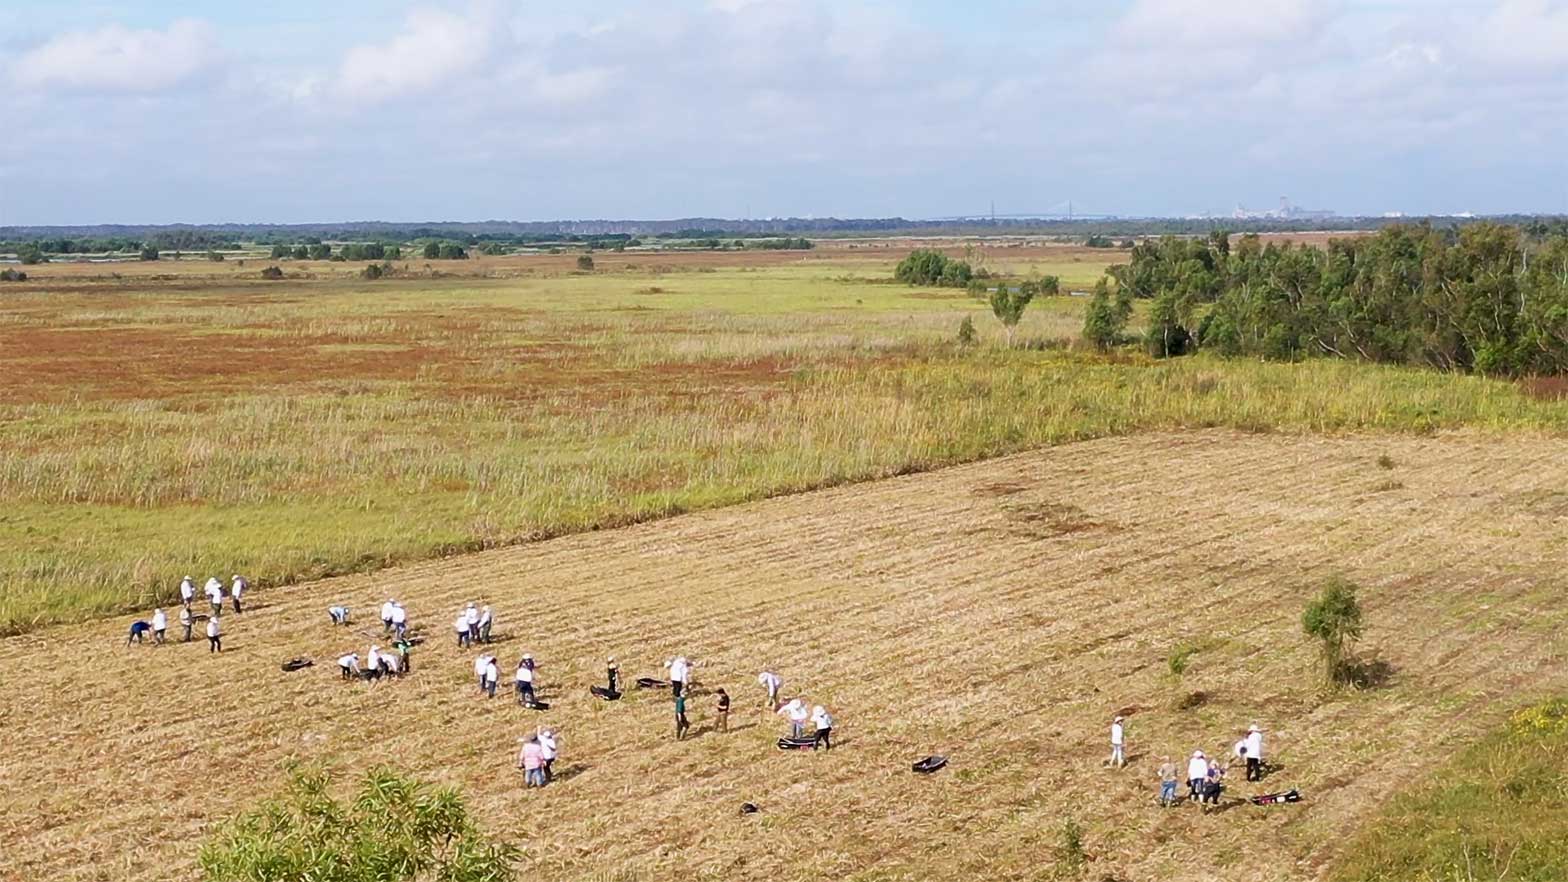 large meadow lands with volunteers cleaning up the debris and planting trees